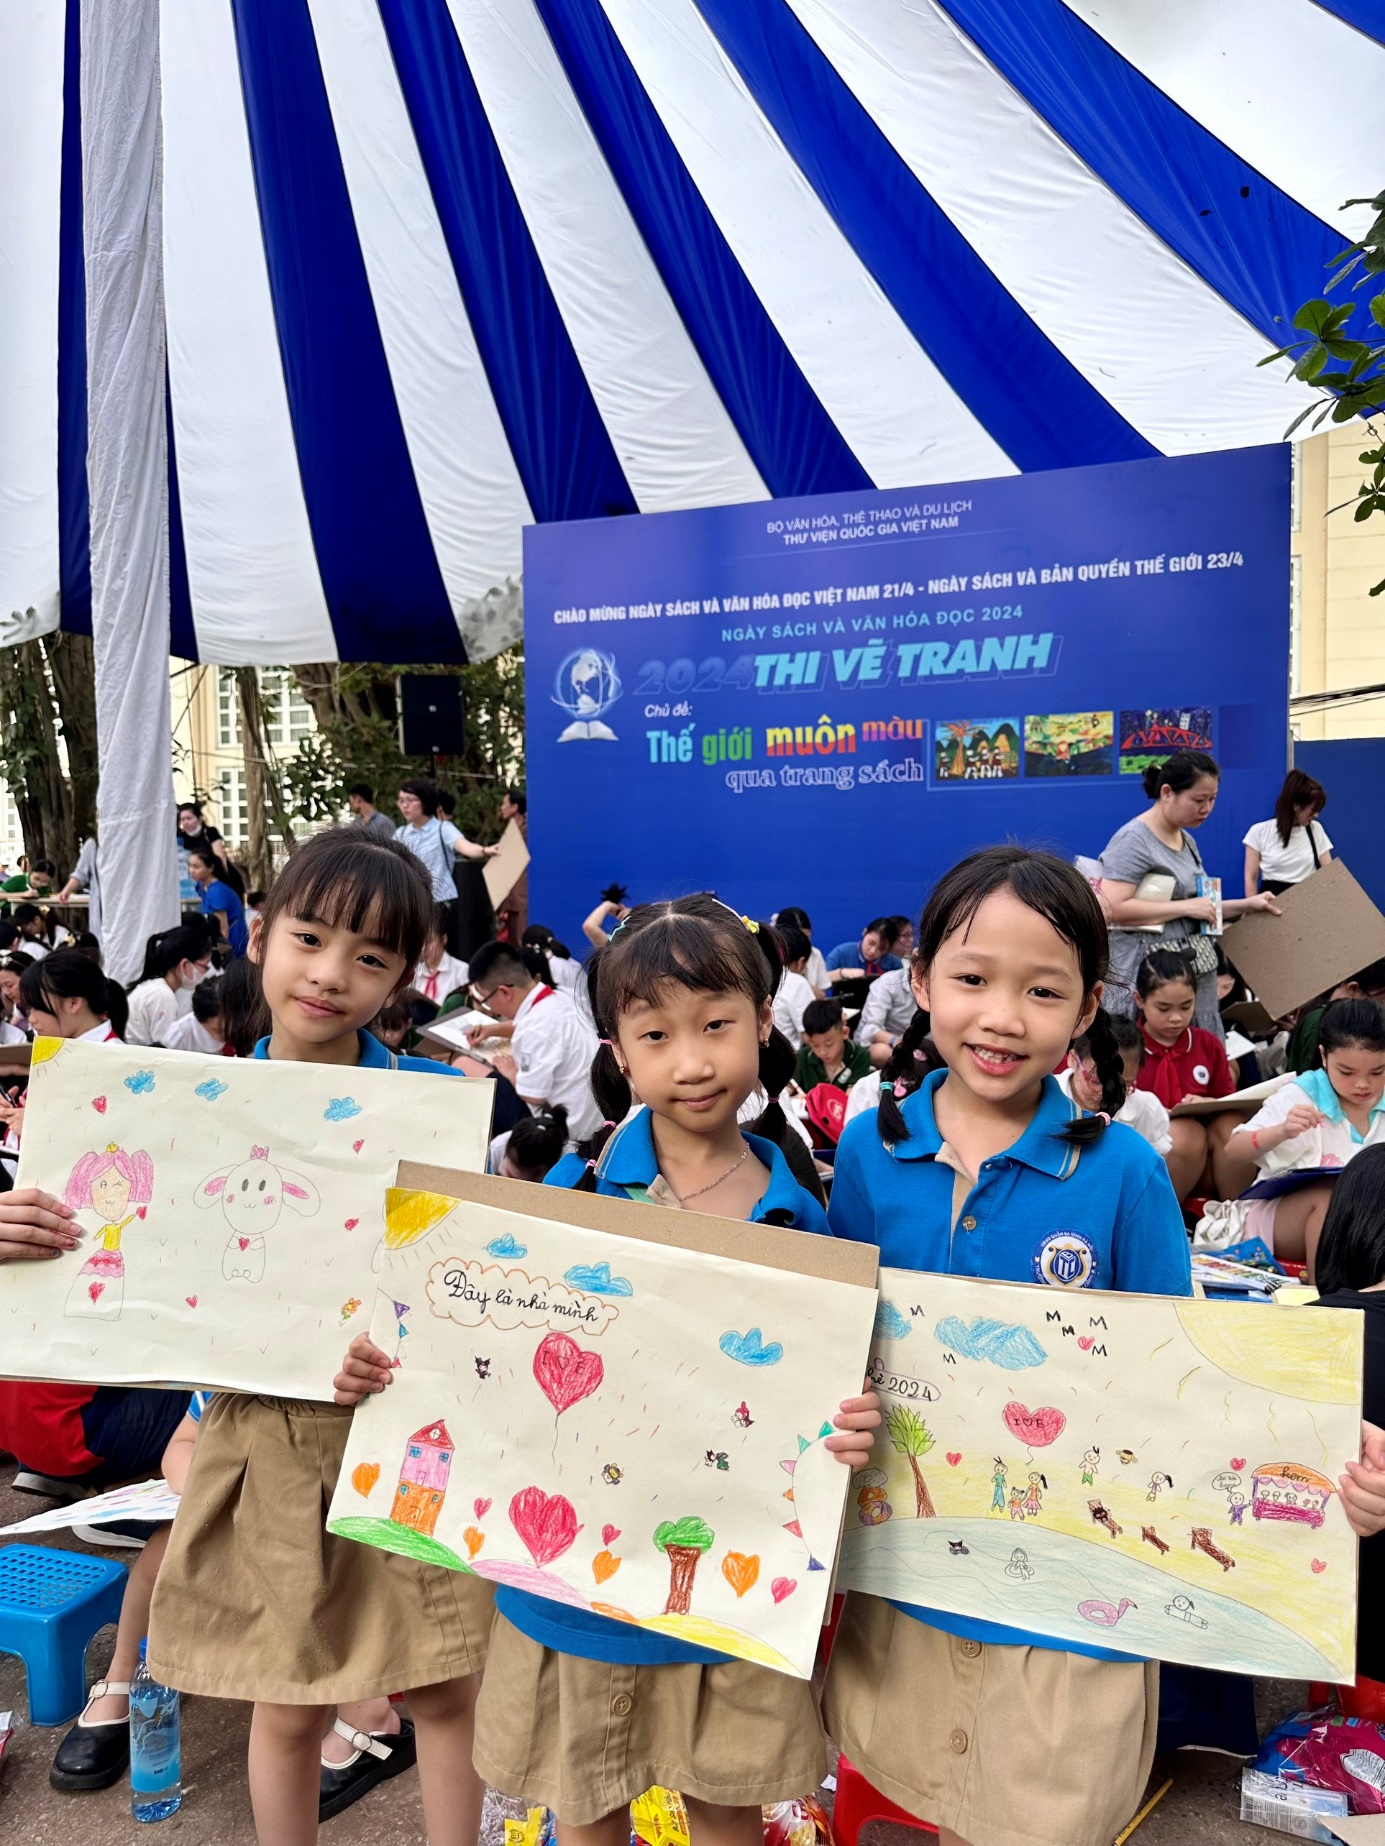 A group of children holding up posters

Description automatically generated